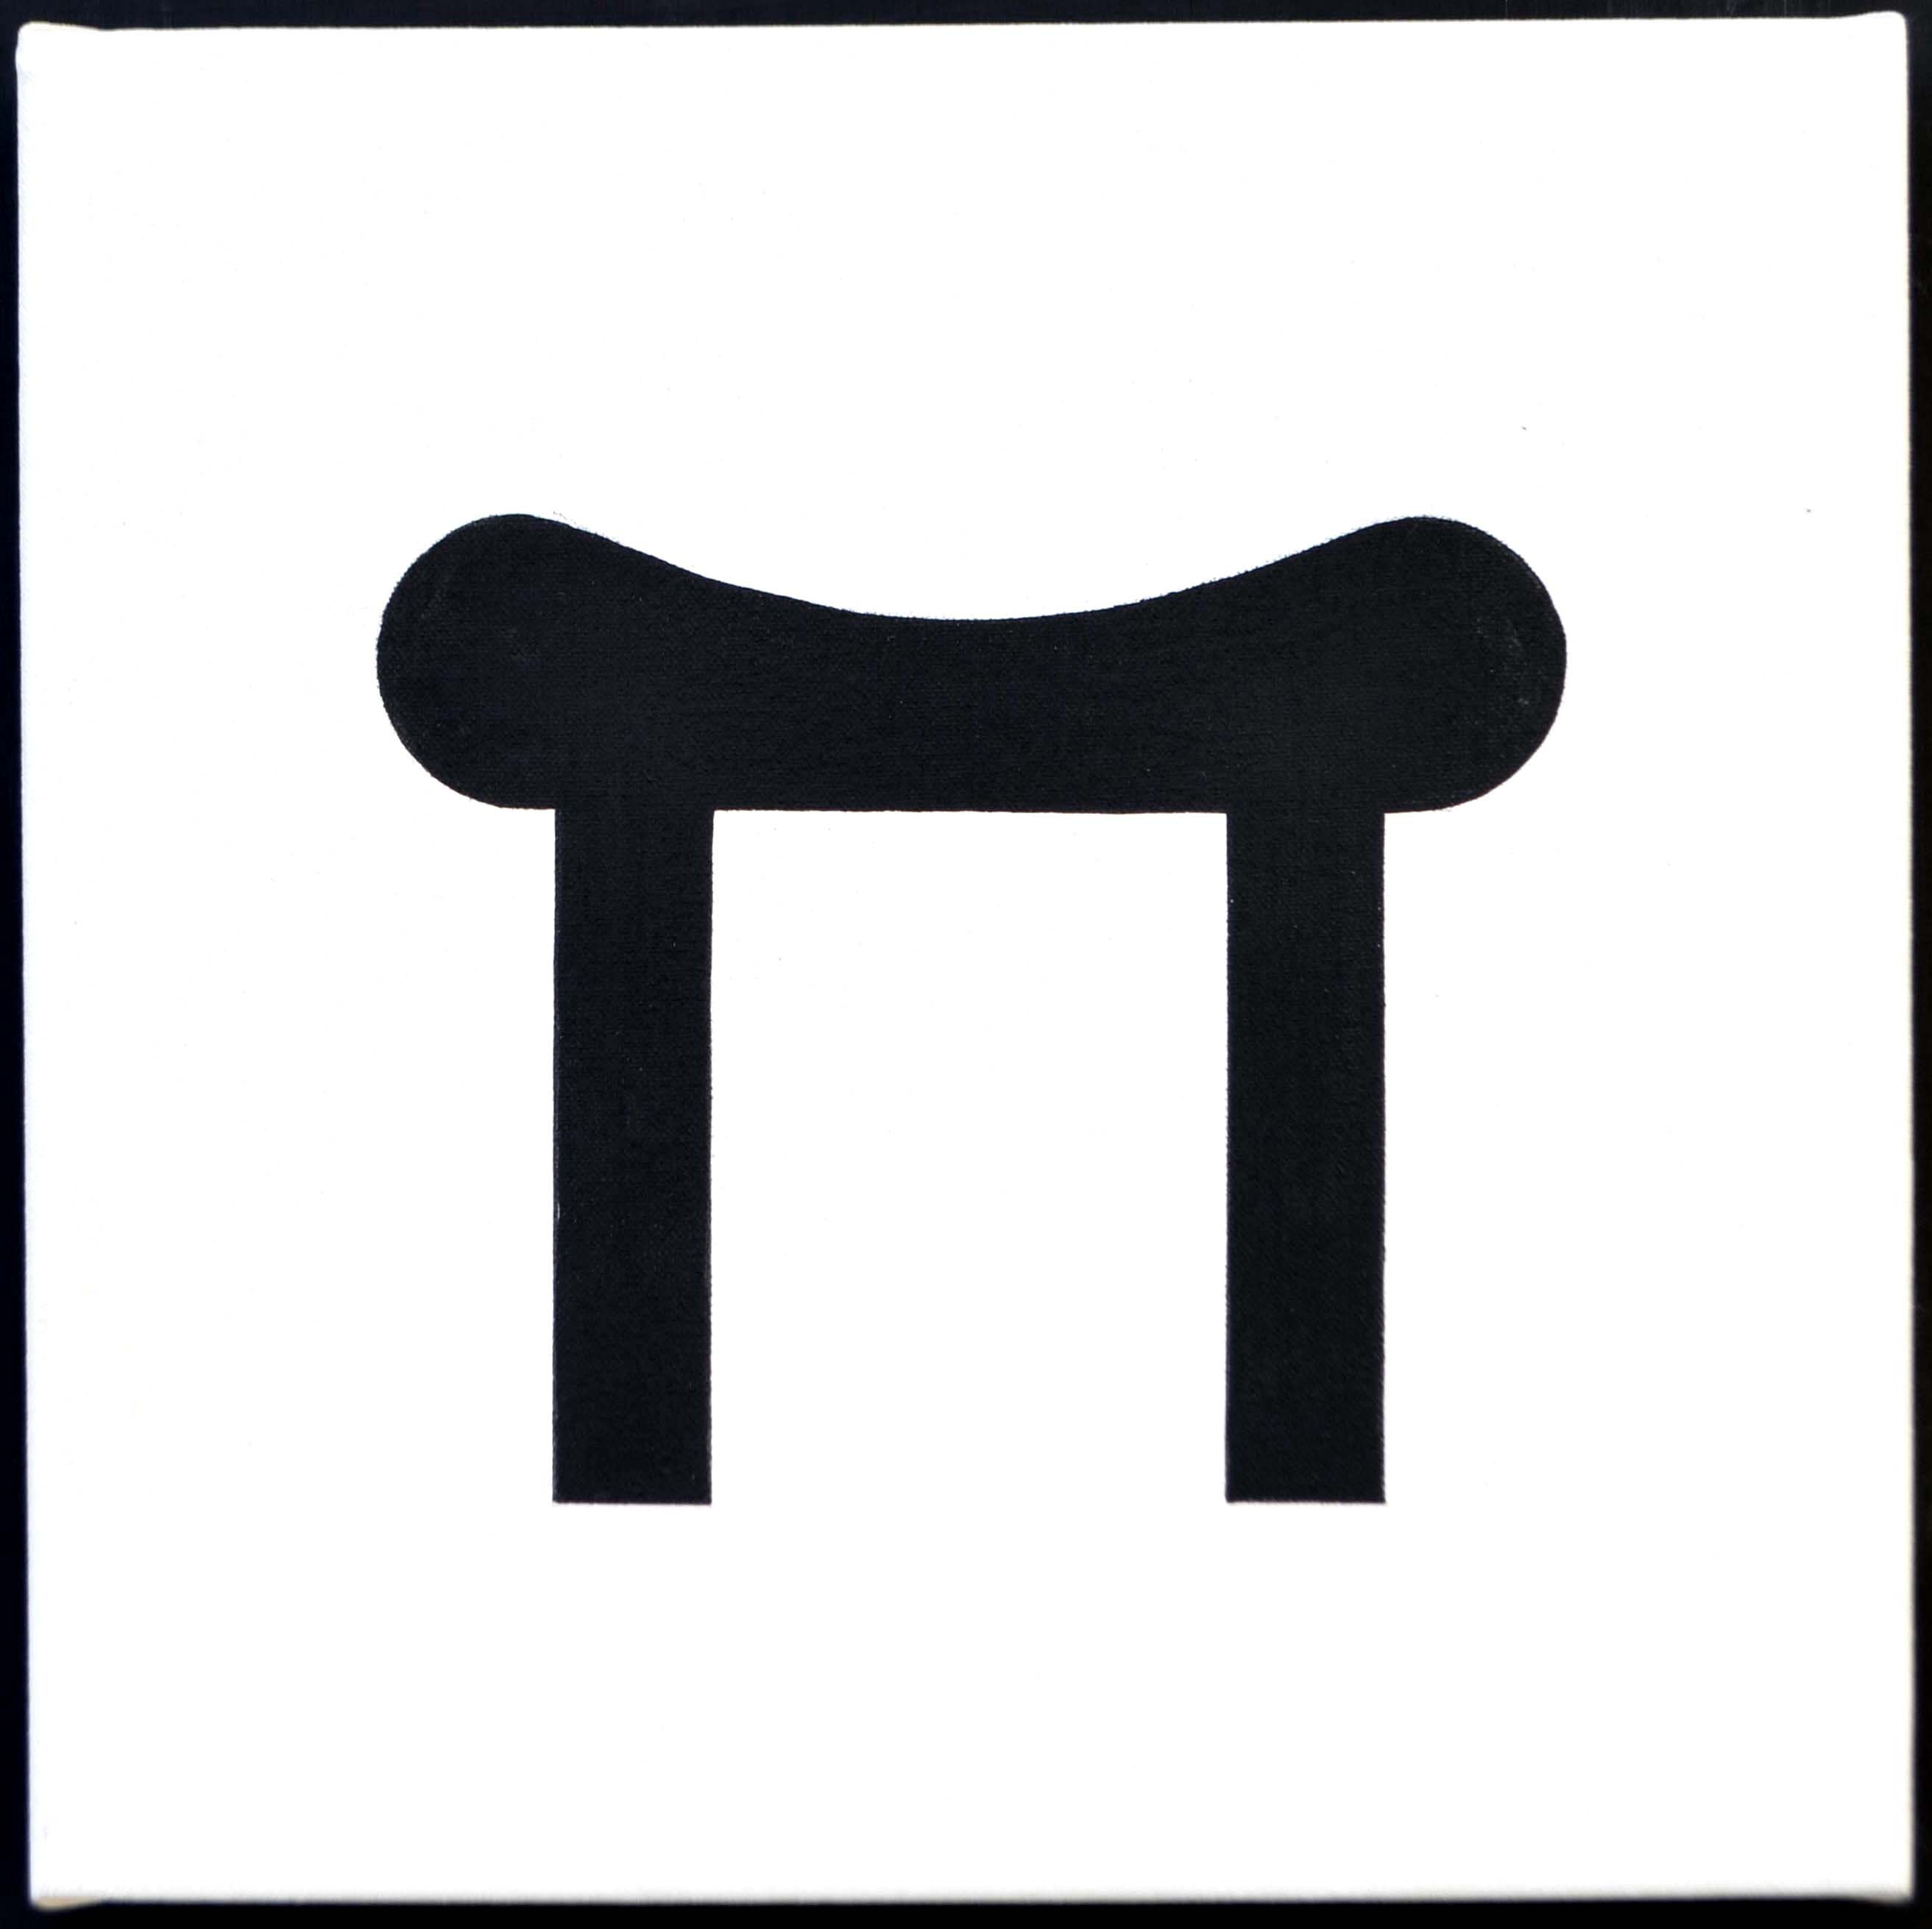 Top of a crutch and mathematical symbol of Pi.